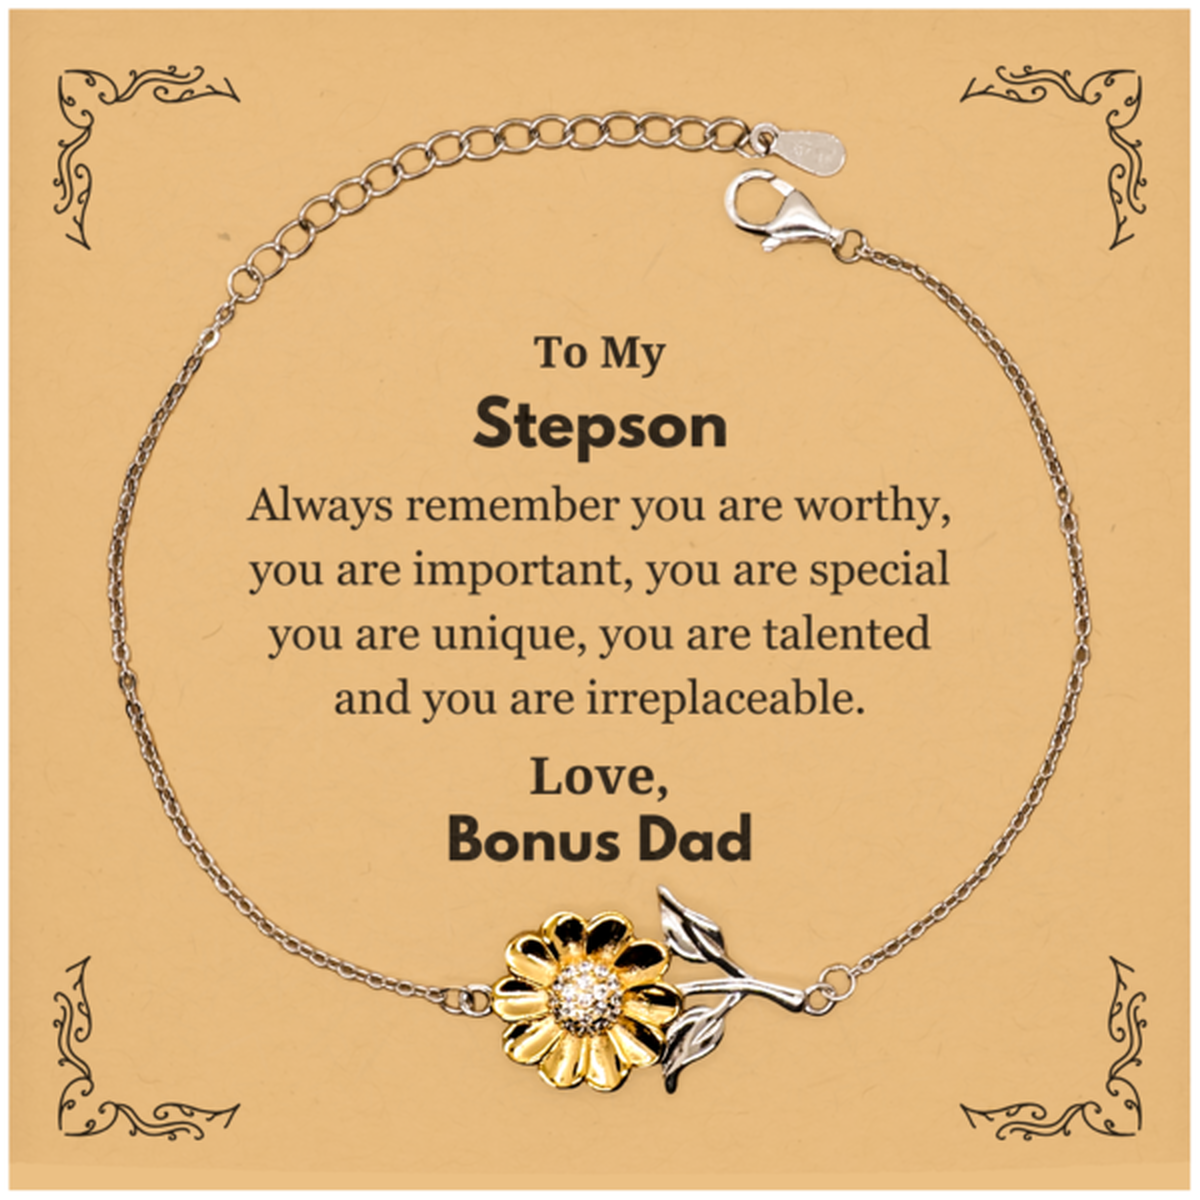 Stepson Birthday Gifts from Bonus Dad, Inspirational Sunflower Bracelet for Stepson Christmas Graduation Gifts for Stepson Always remember you are worthy, you are important. Love, Bonus Dad